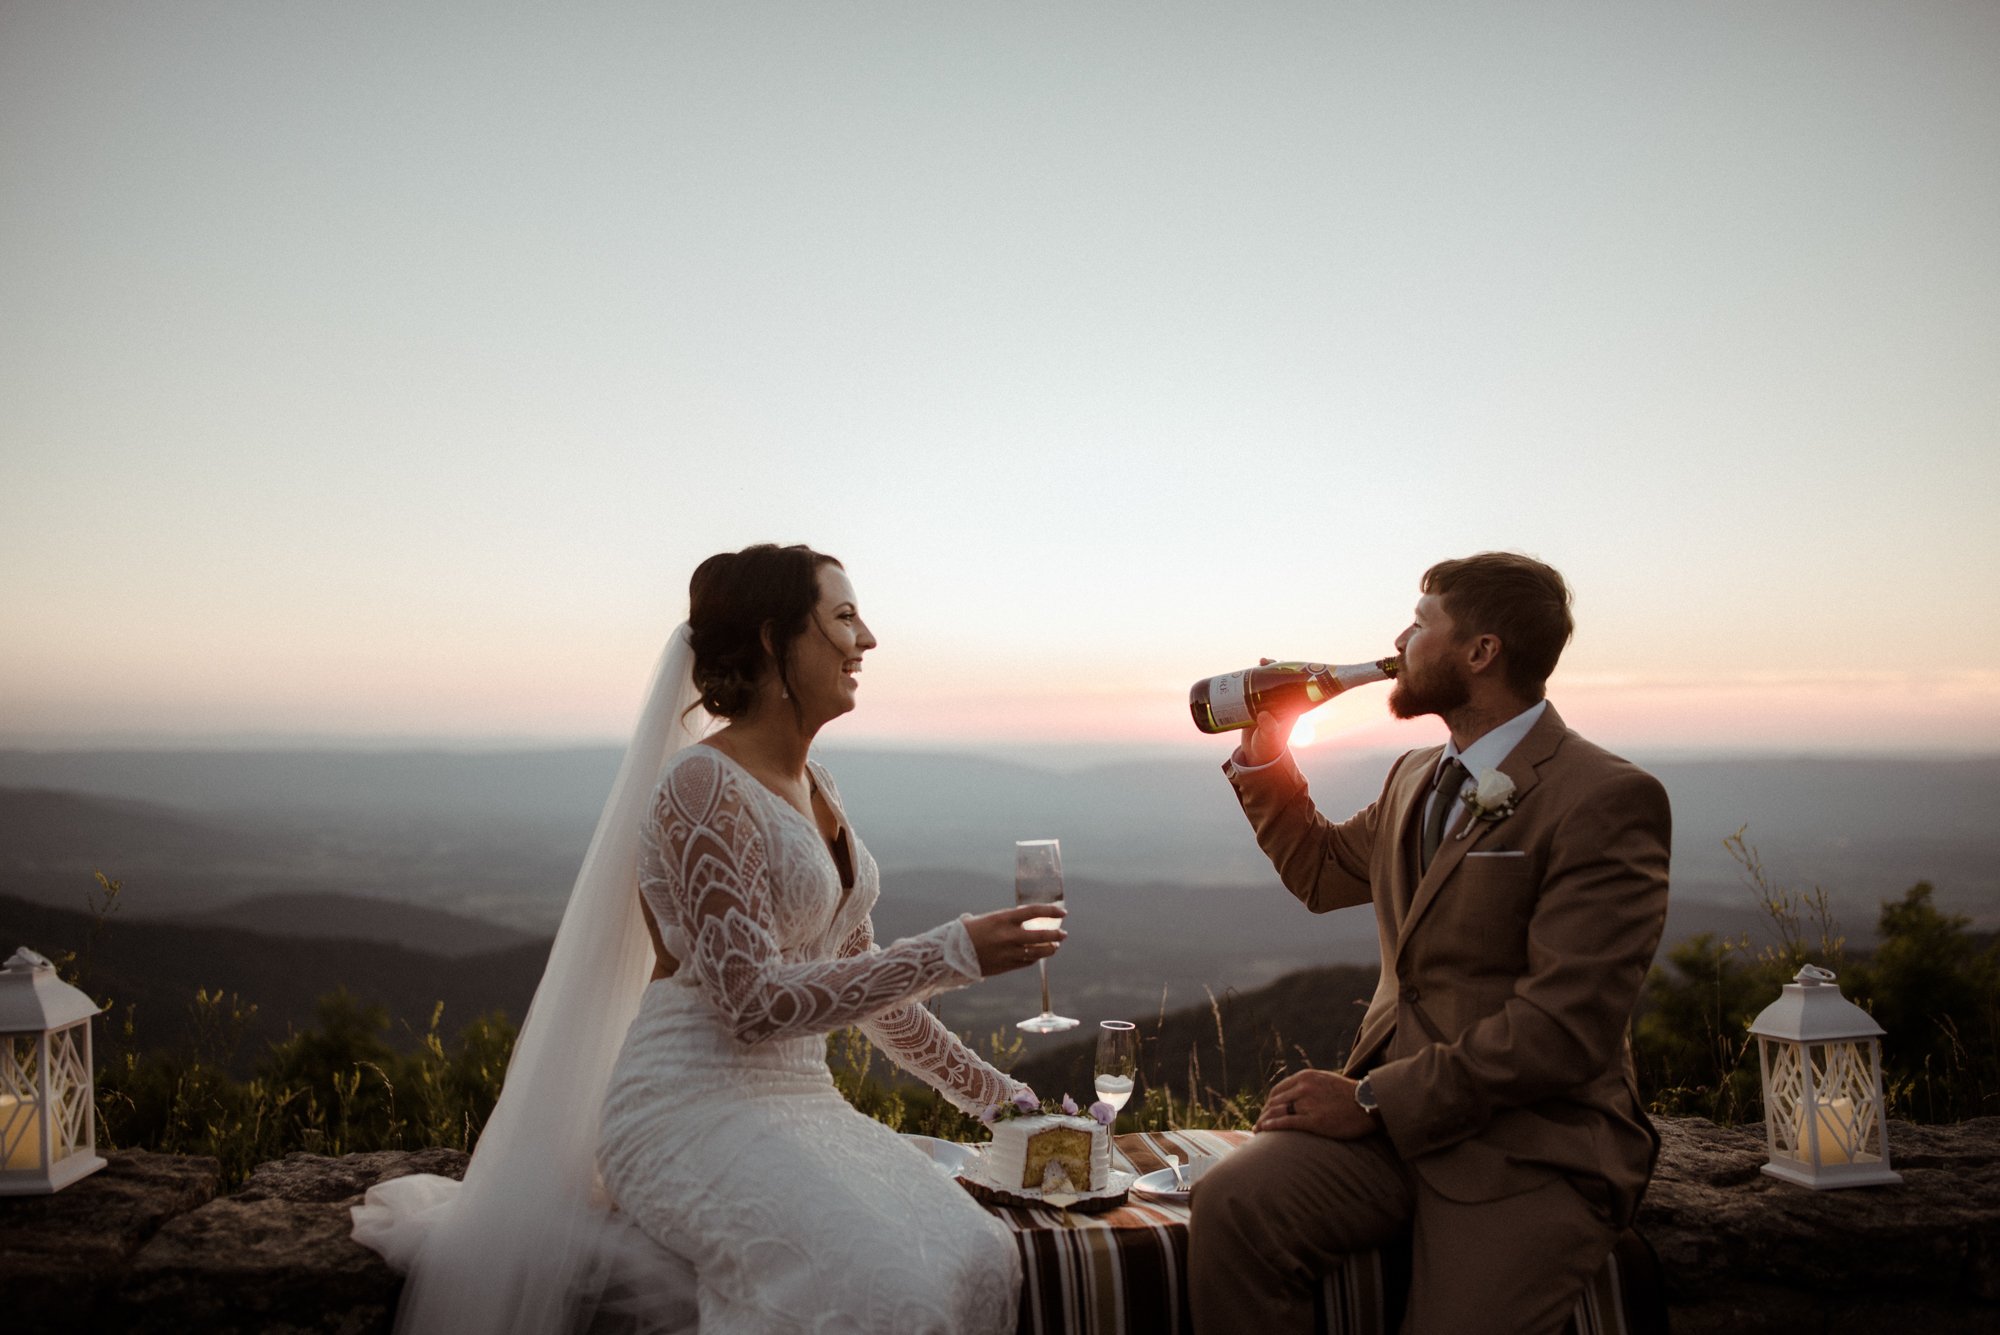 Sunset Elopement on Stony Man Summit in Shenandoah National Park - White Sails Creative Elopement Photography - July Elopement on the Blue Ridge Parkway_70.jpg